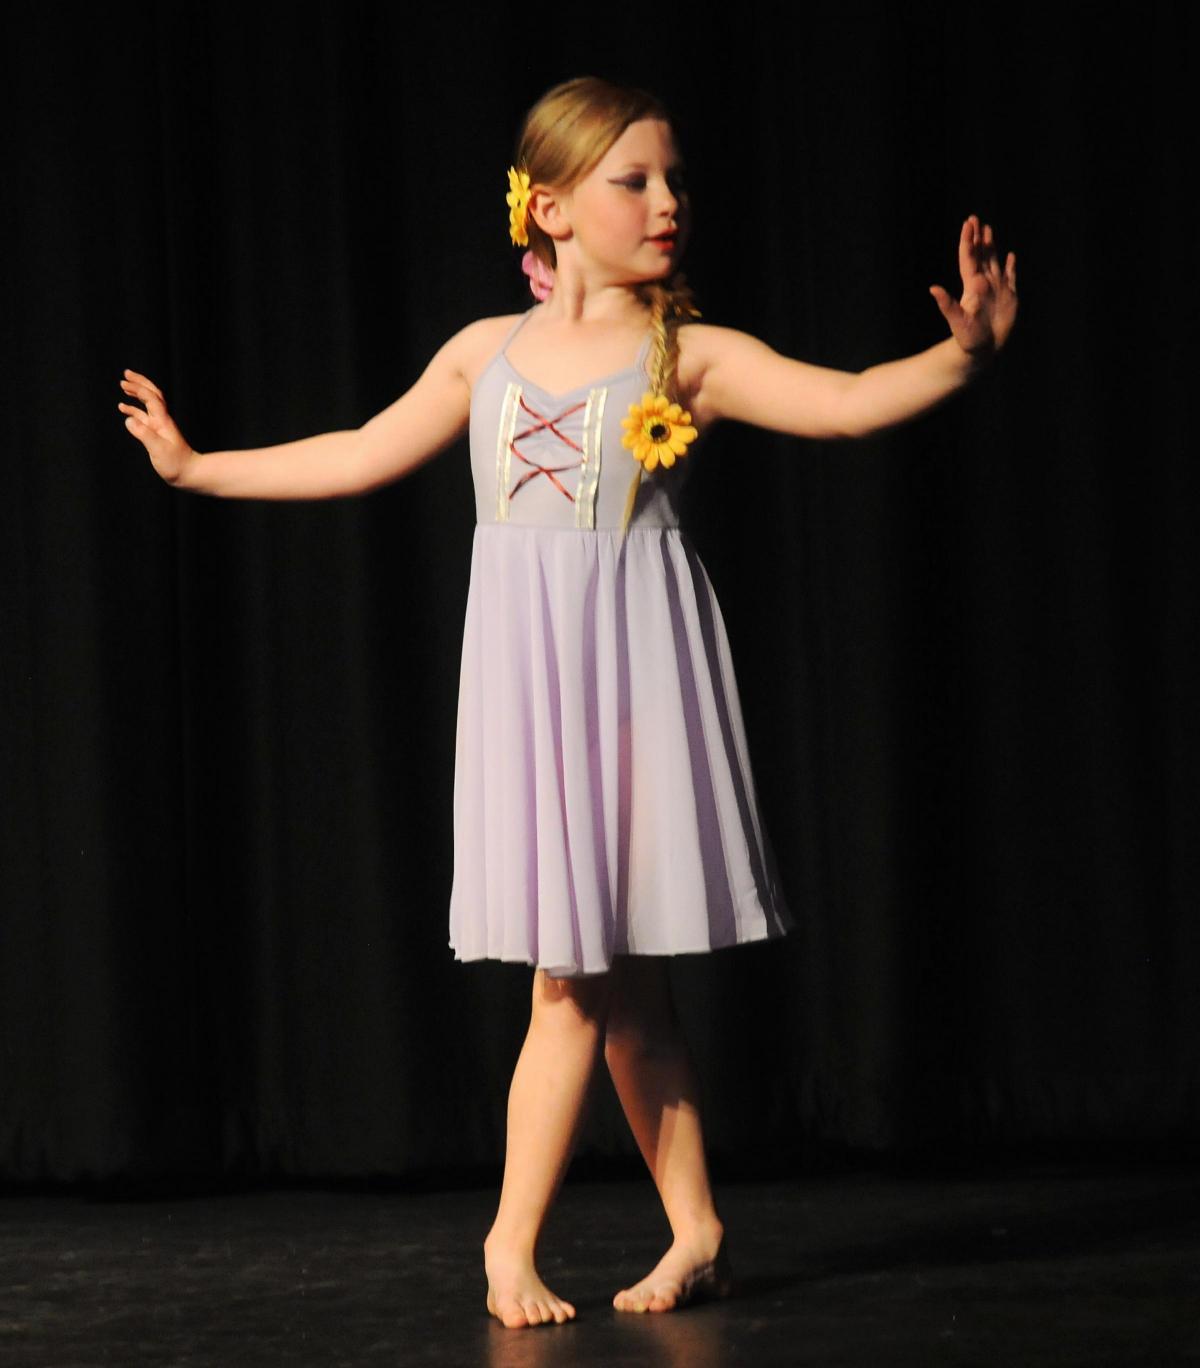 The Queen of the Solway is back with more than 80 young dancers